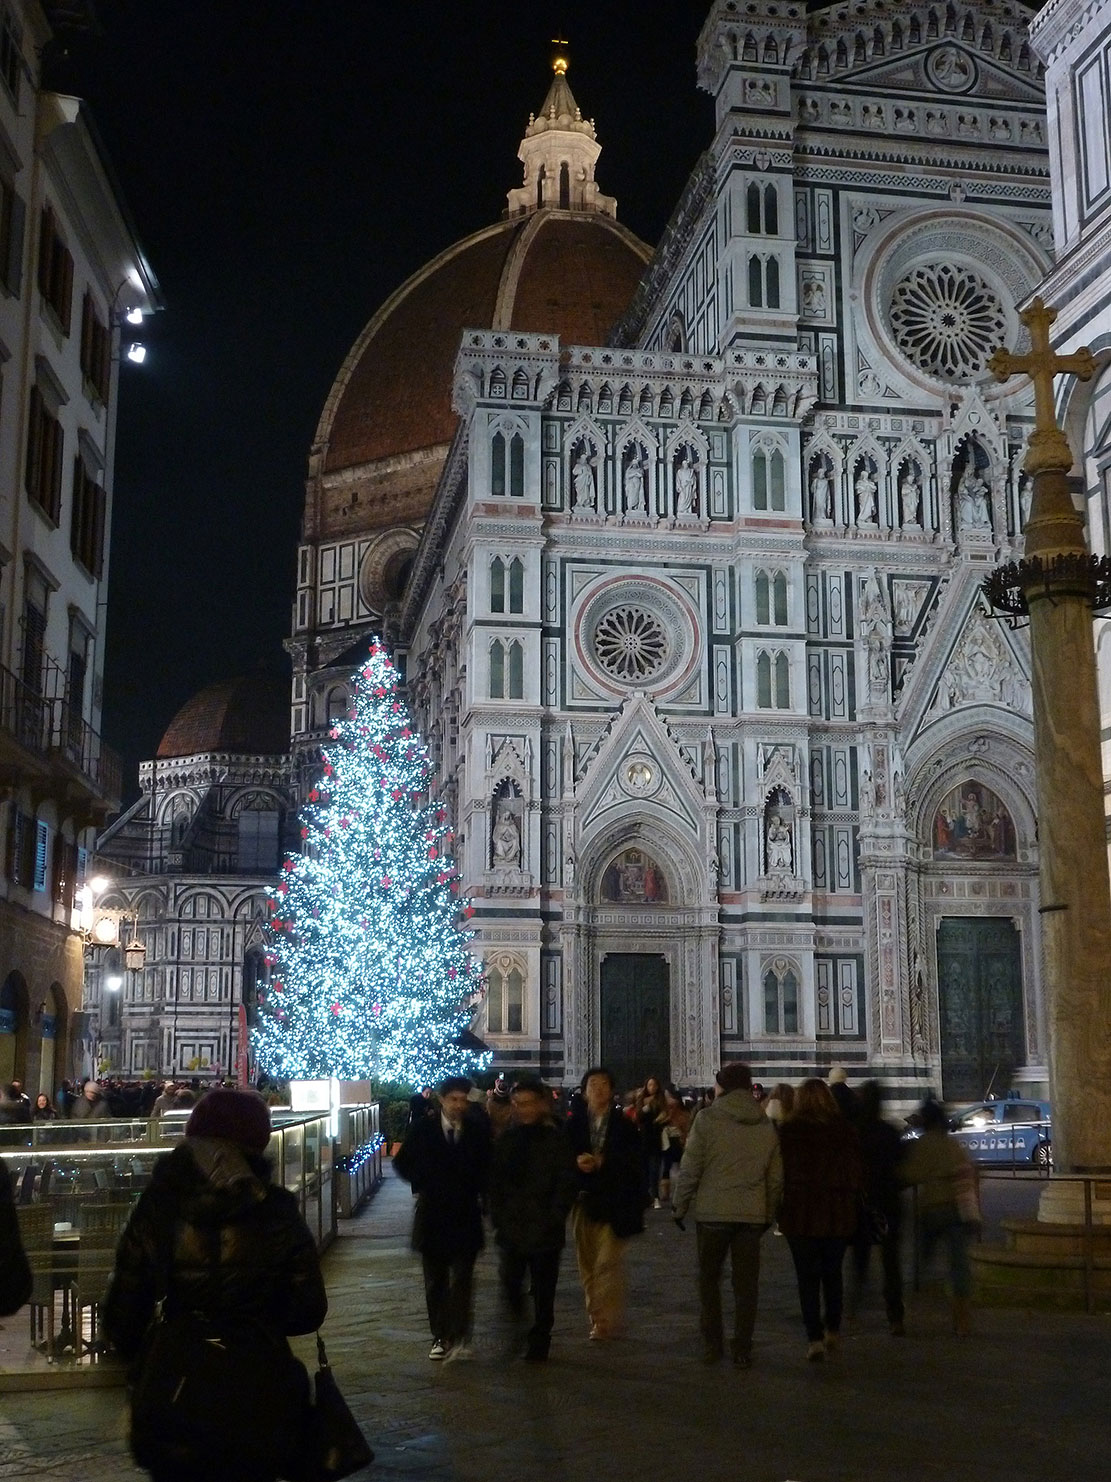 The Duomo, Santa Maria del Fiore -- Cathedral of Florence, is magnificent at Christmas.